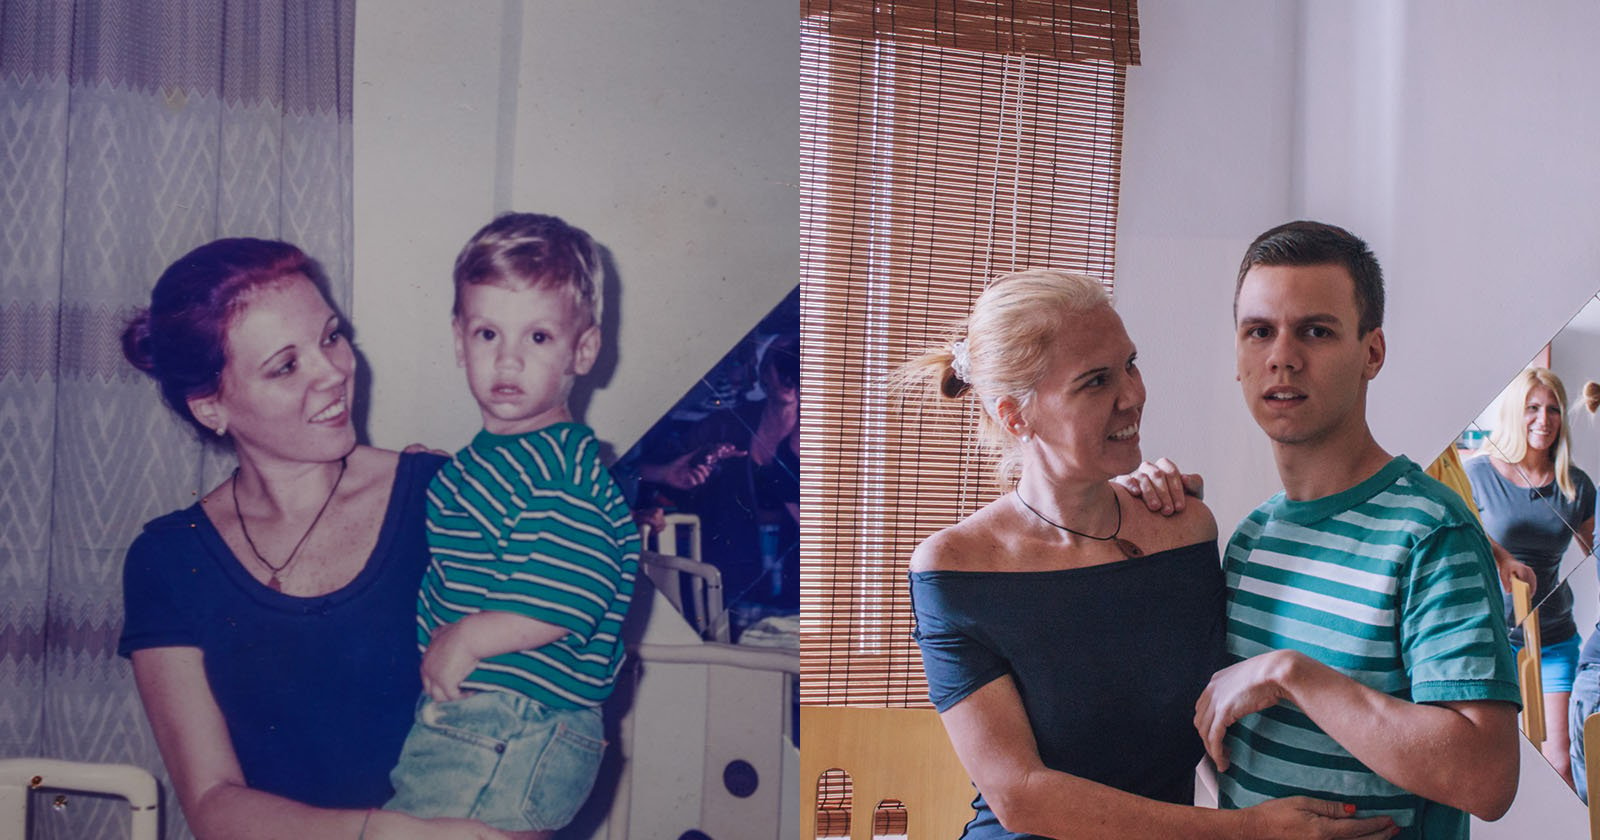 Recreated Family Photos from Around the World